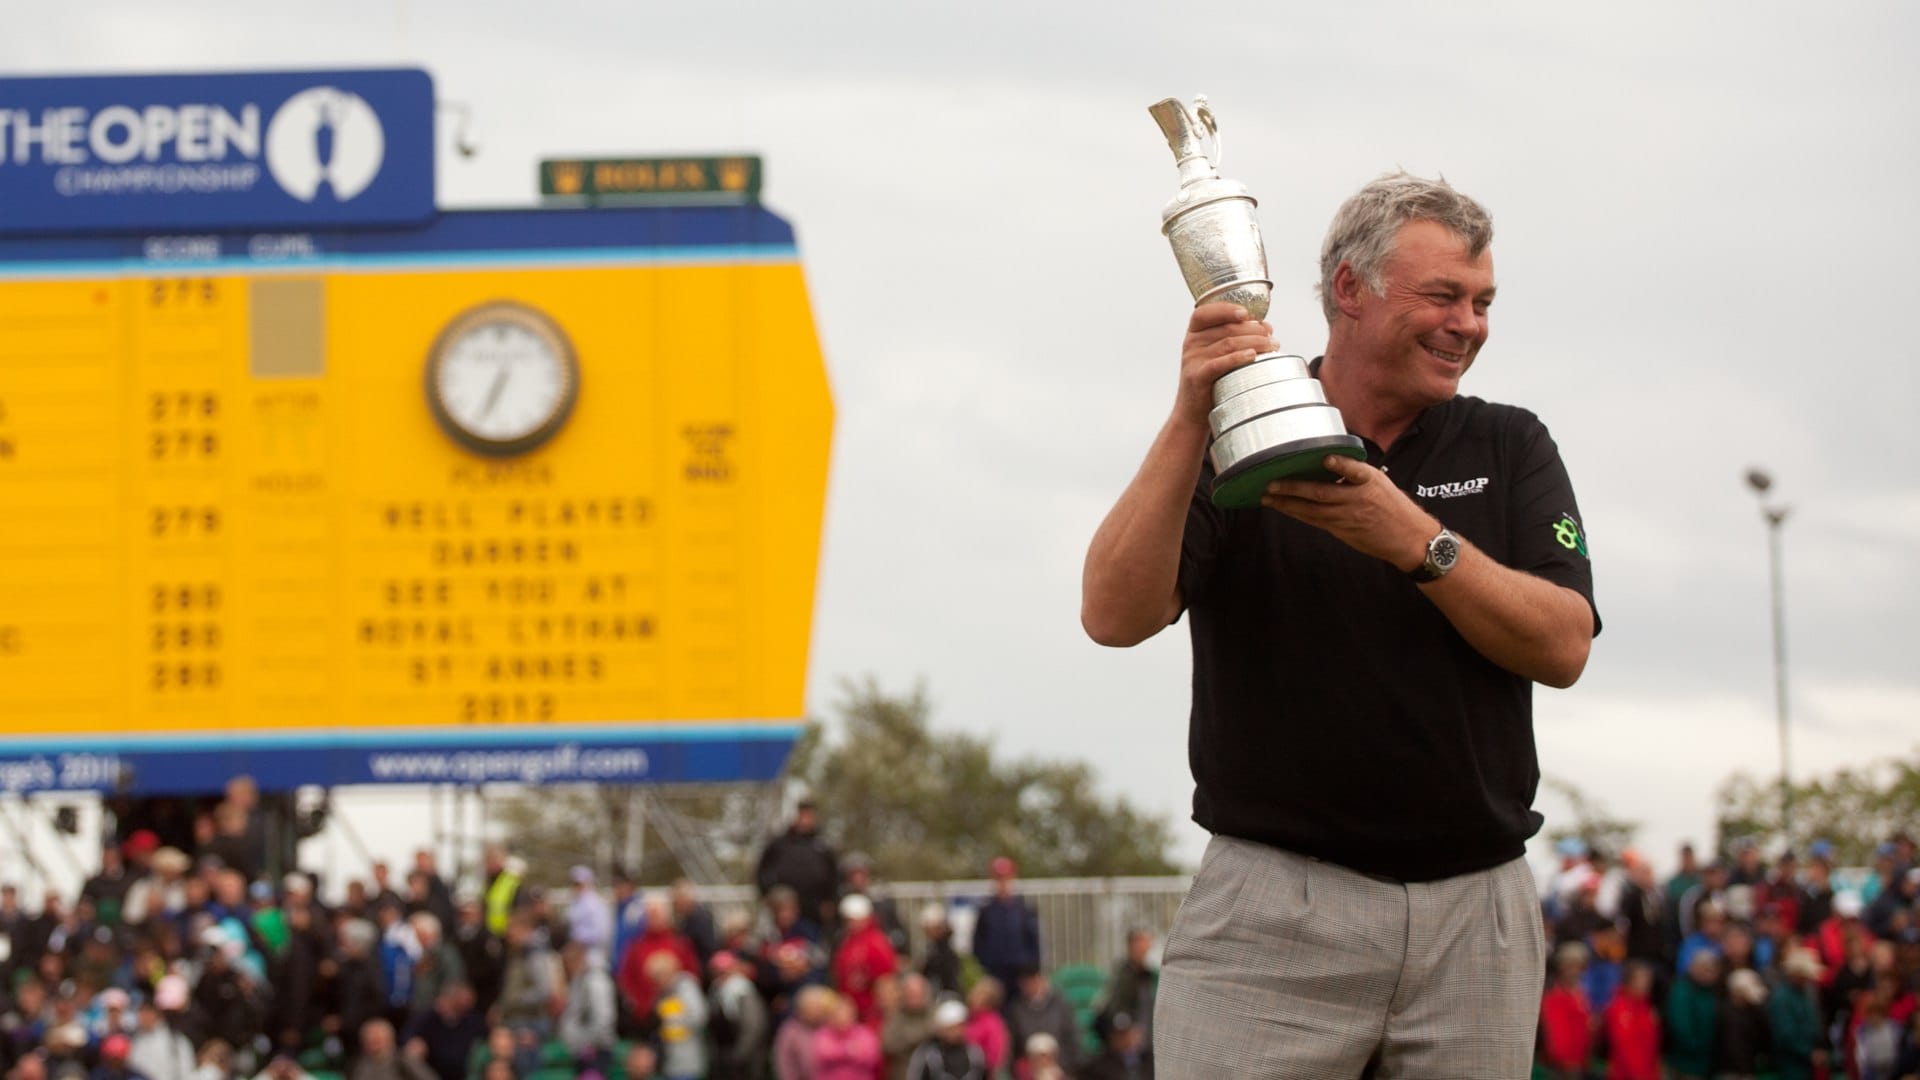 Darren Clarke of Northern Ireland holds the Claret Jug after winning the 2011 Open Championship at Royal St. George's Golf Club in Sandwich, England on July 17, 2011. (Photo by Darren Carroll/Getty Images)